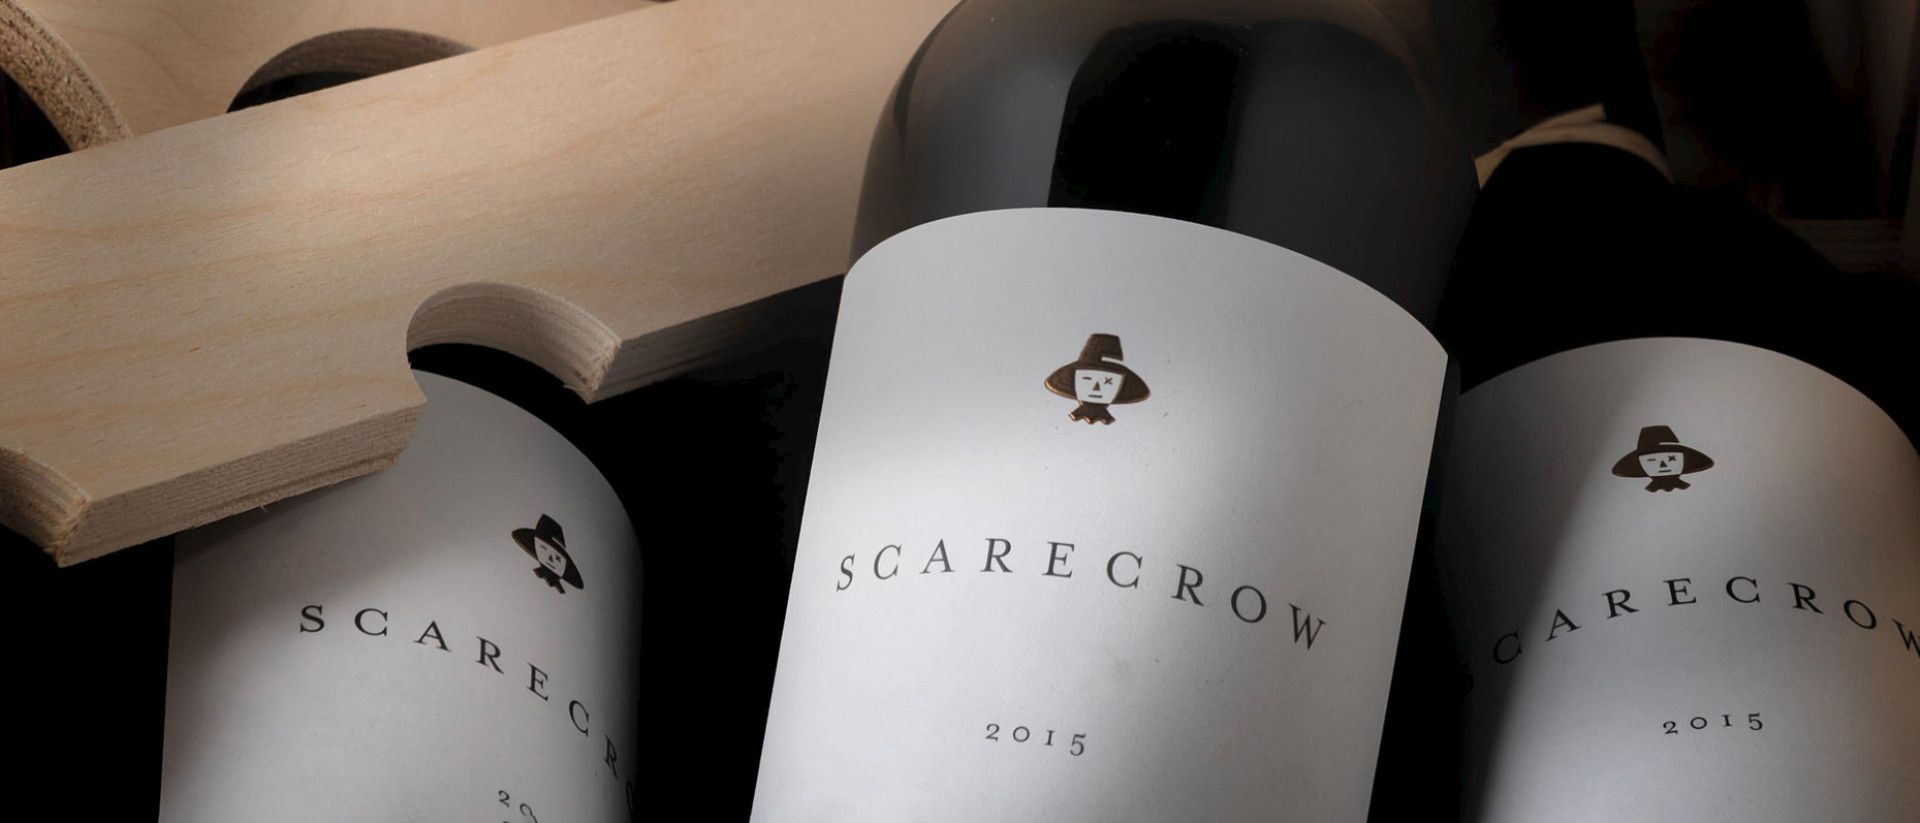 Image of bottles of 2015 Scarecrow Wine, showcasing the elegance and heritage of Napa Valley's esteemed Cabernet Sauvignon vineyards, highlighting the focus keyword 'scarecrow wine'.